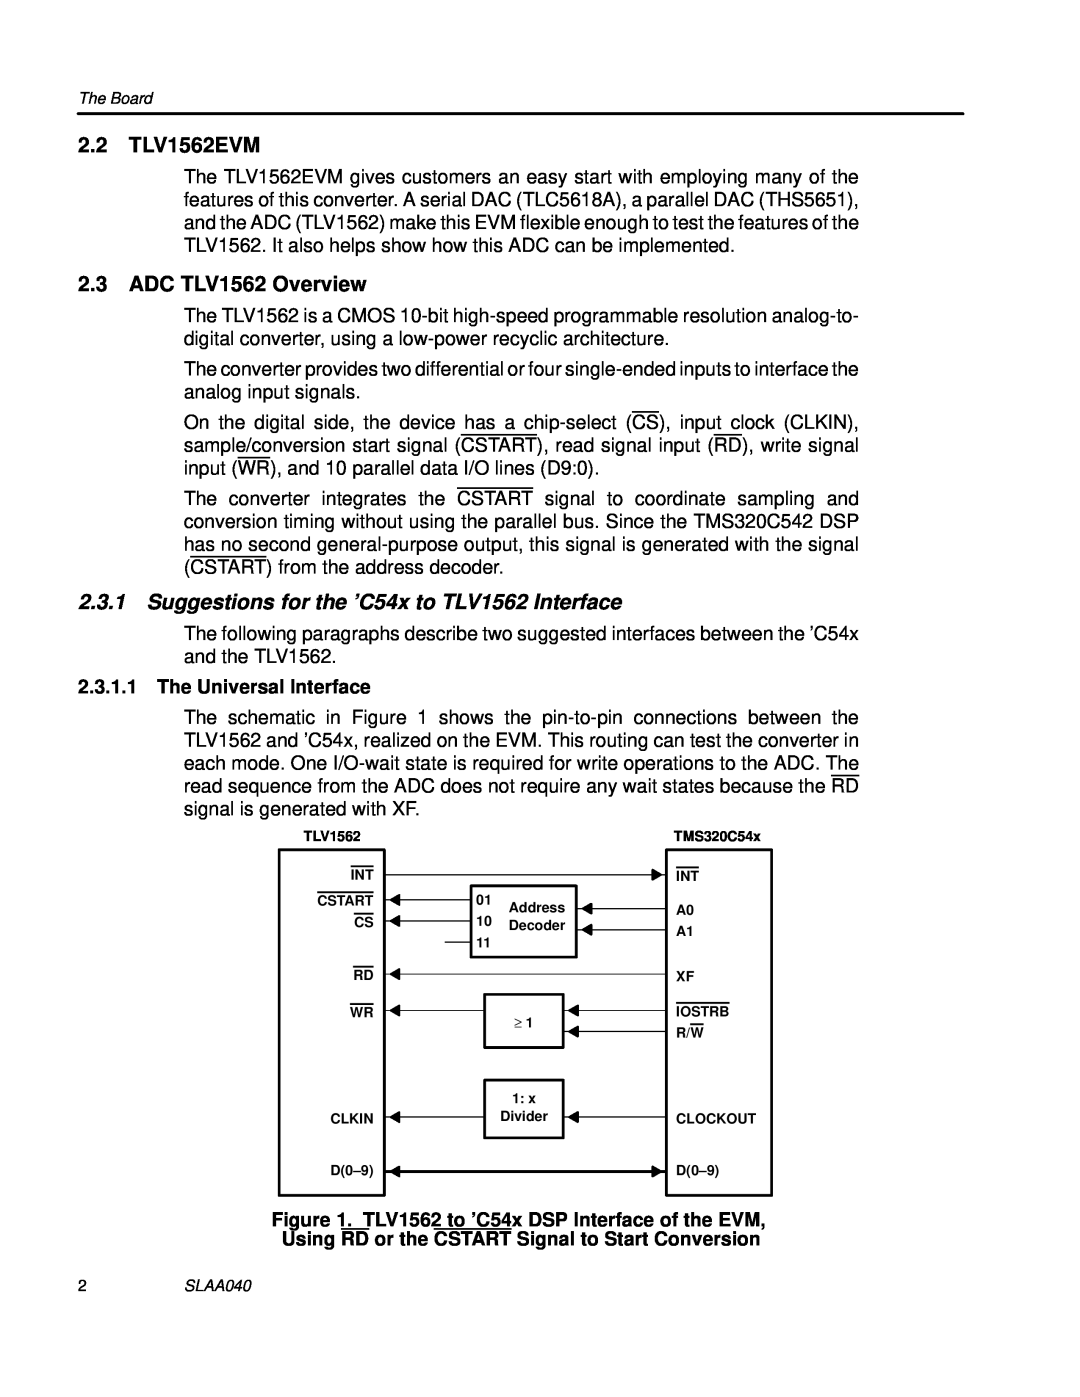 Texas Instruments manual 2.2 TLV1562EVM, ADC TLV1562 Overview, Suggestions for the ’C54x to TLV1562 Interface 